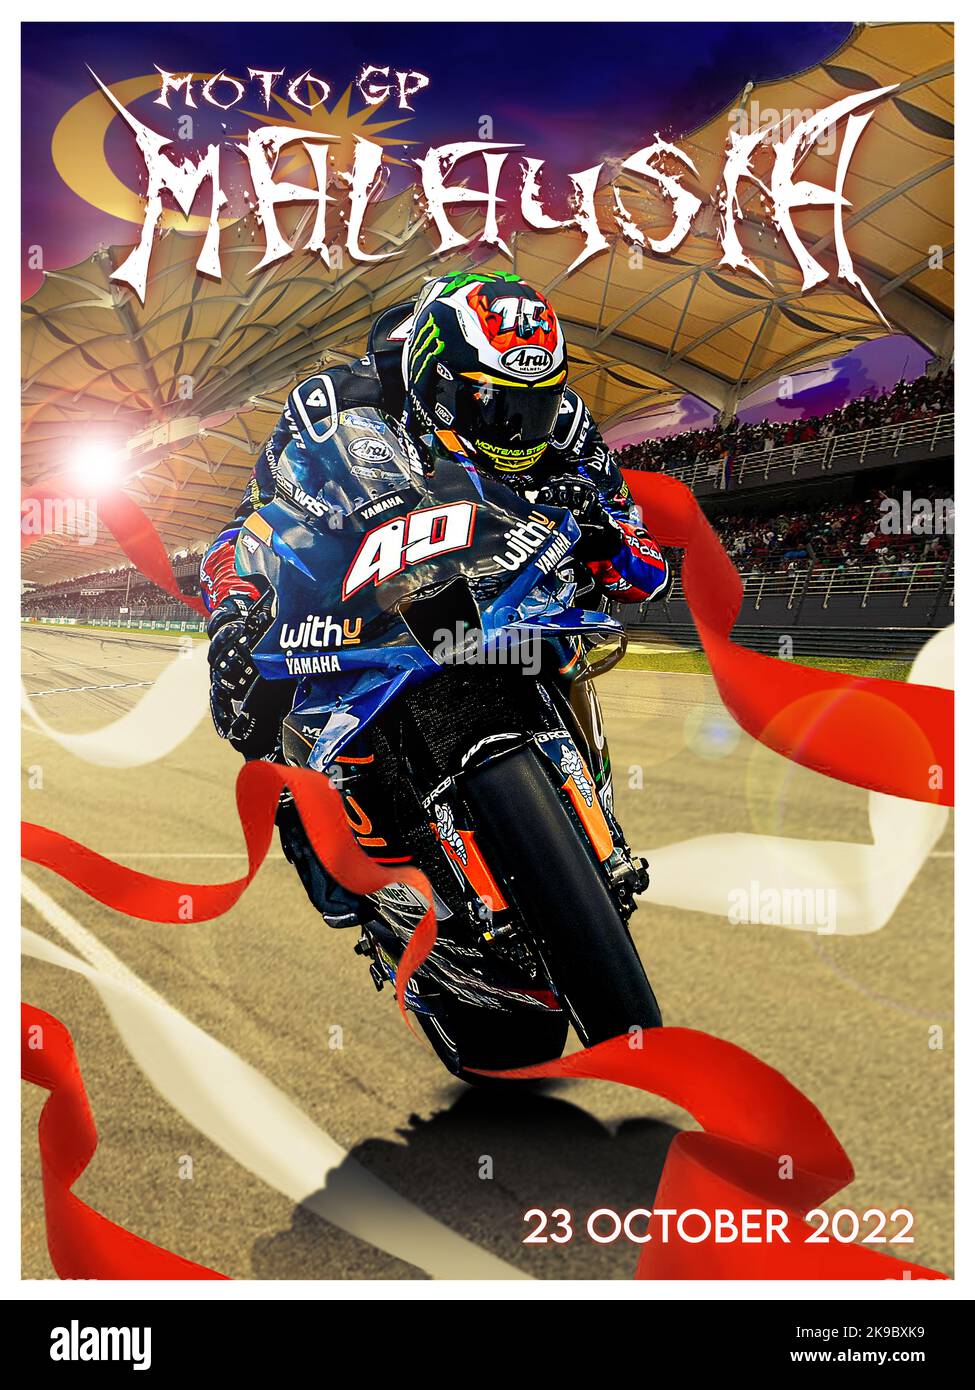 Malaysia moto GP 2022 Race Poster Banque D'Images